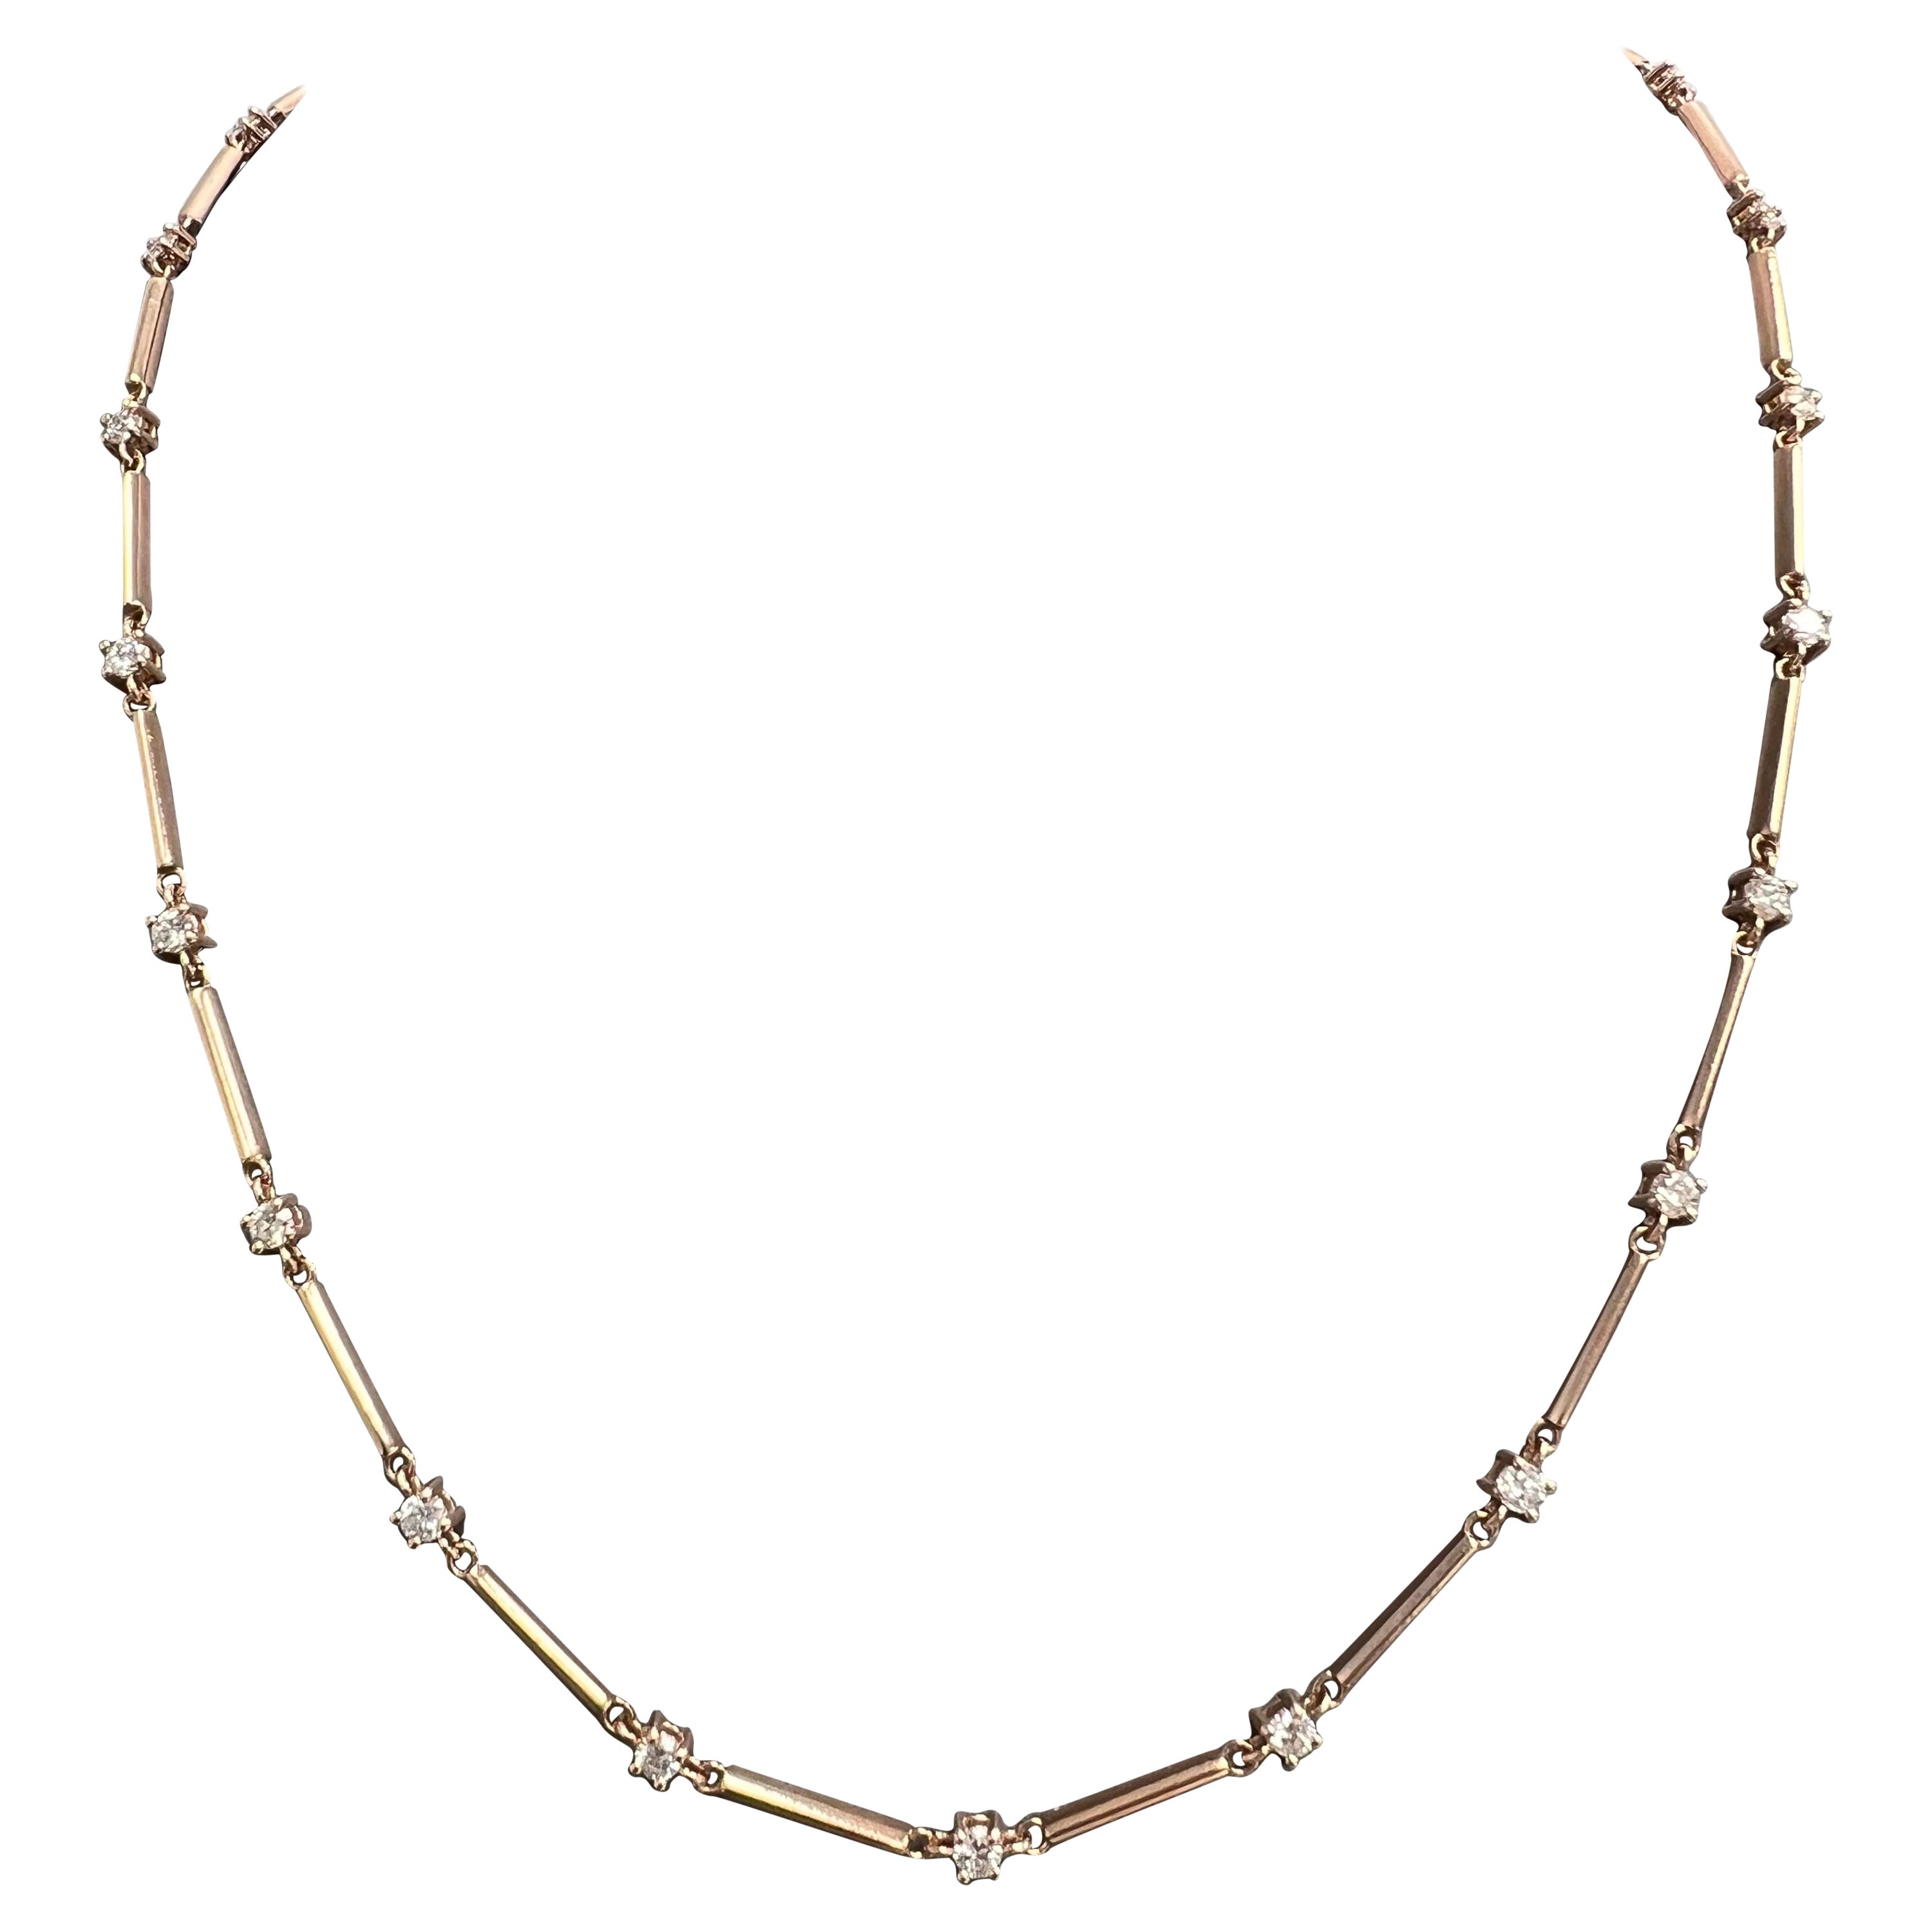 14K Rose Gold Diamonds Necklace with 2.01 Natural Diamonds in a Gold-Bar Chain.
Great Design for a Diamond Necklace that stays between a Tennis Necklace and a Diamonds by the yard Chain.
Super Trendy and perfect for any occasion.
Natural Brilliant